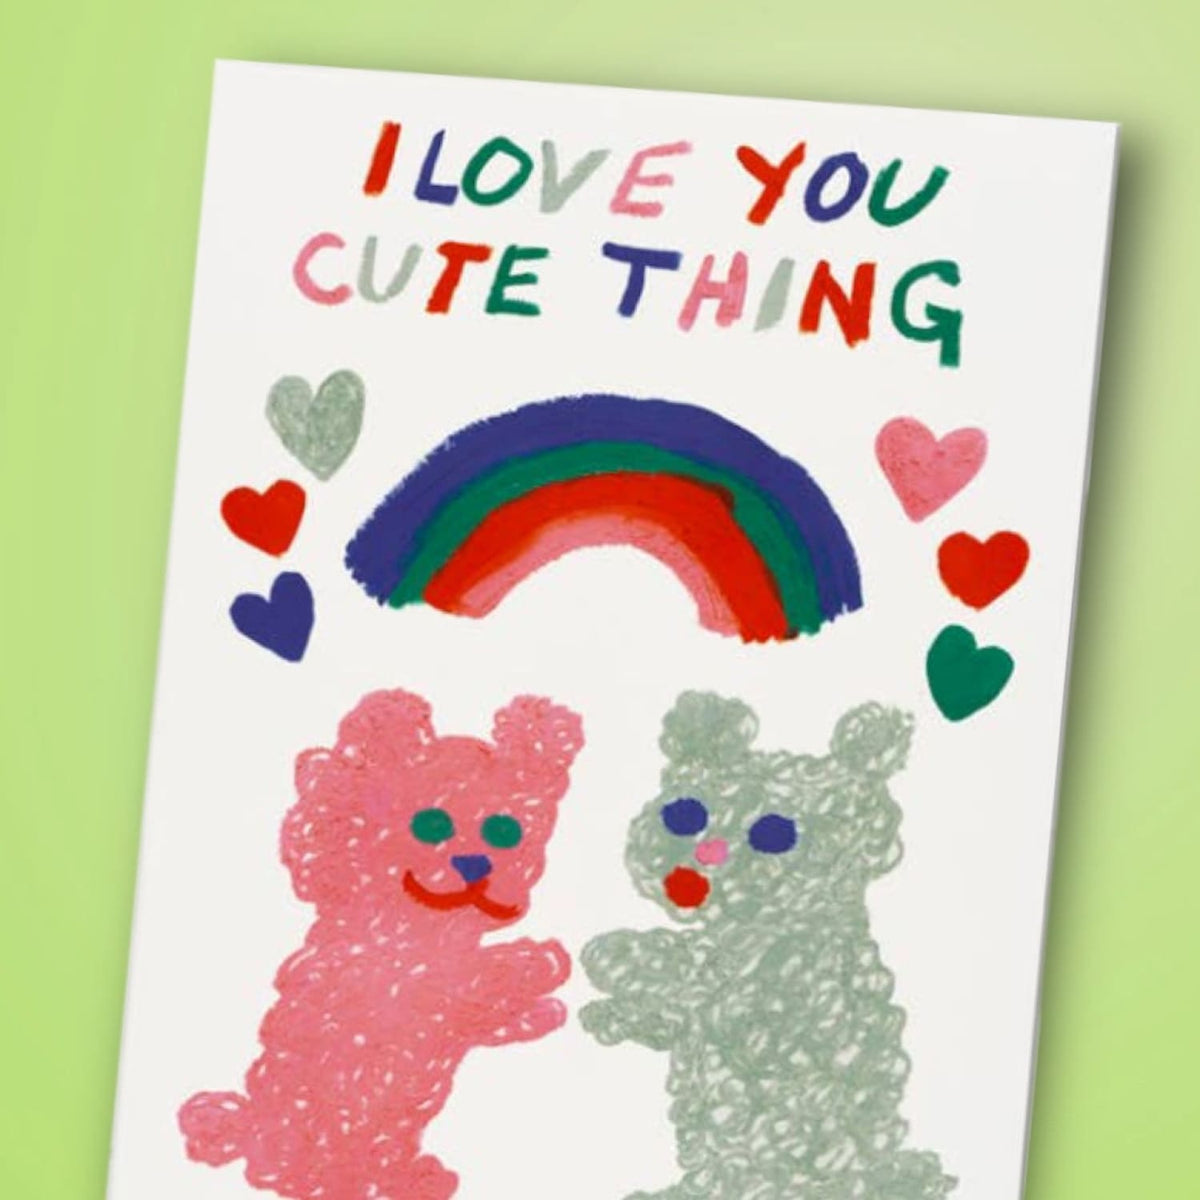 Cute Thing Valentine’s Day Card Greeting Card - Romantic -